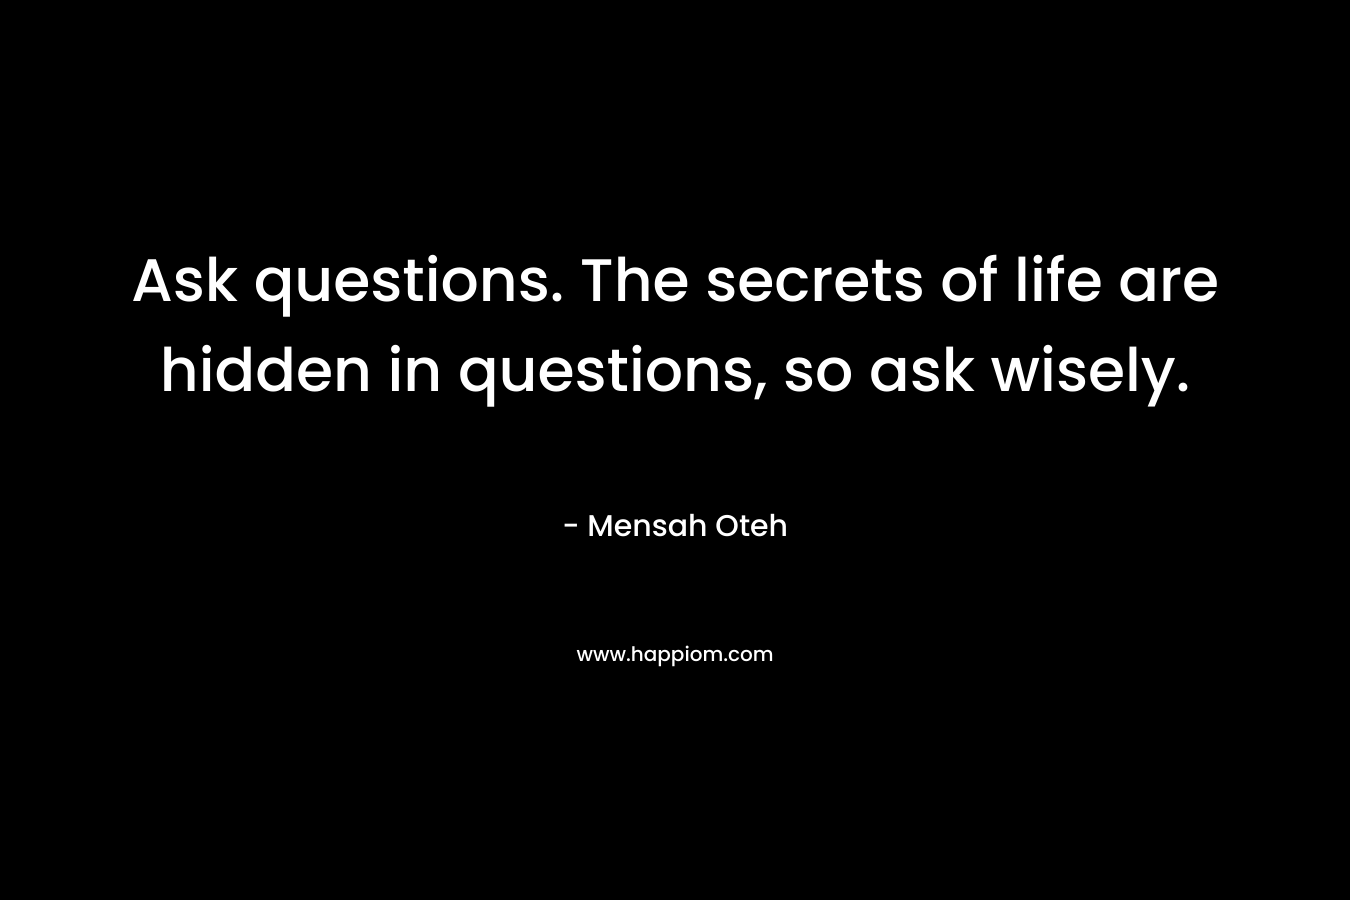 Ask questions. The secrets of life are hidden in questions, so ask wisely.